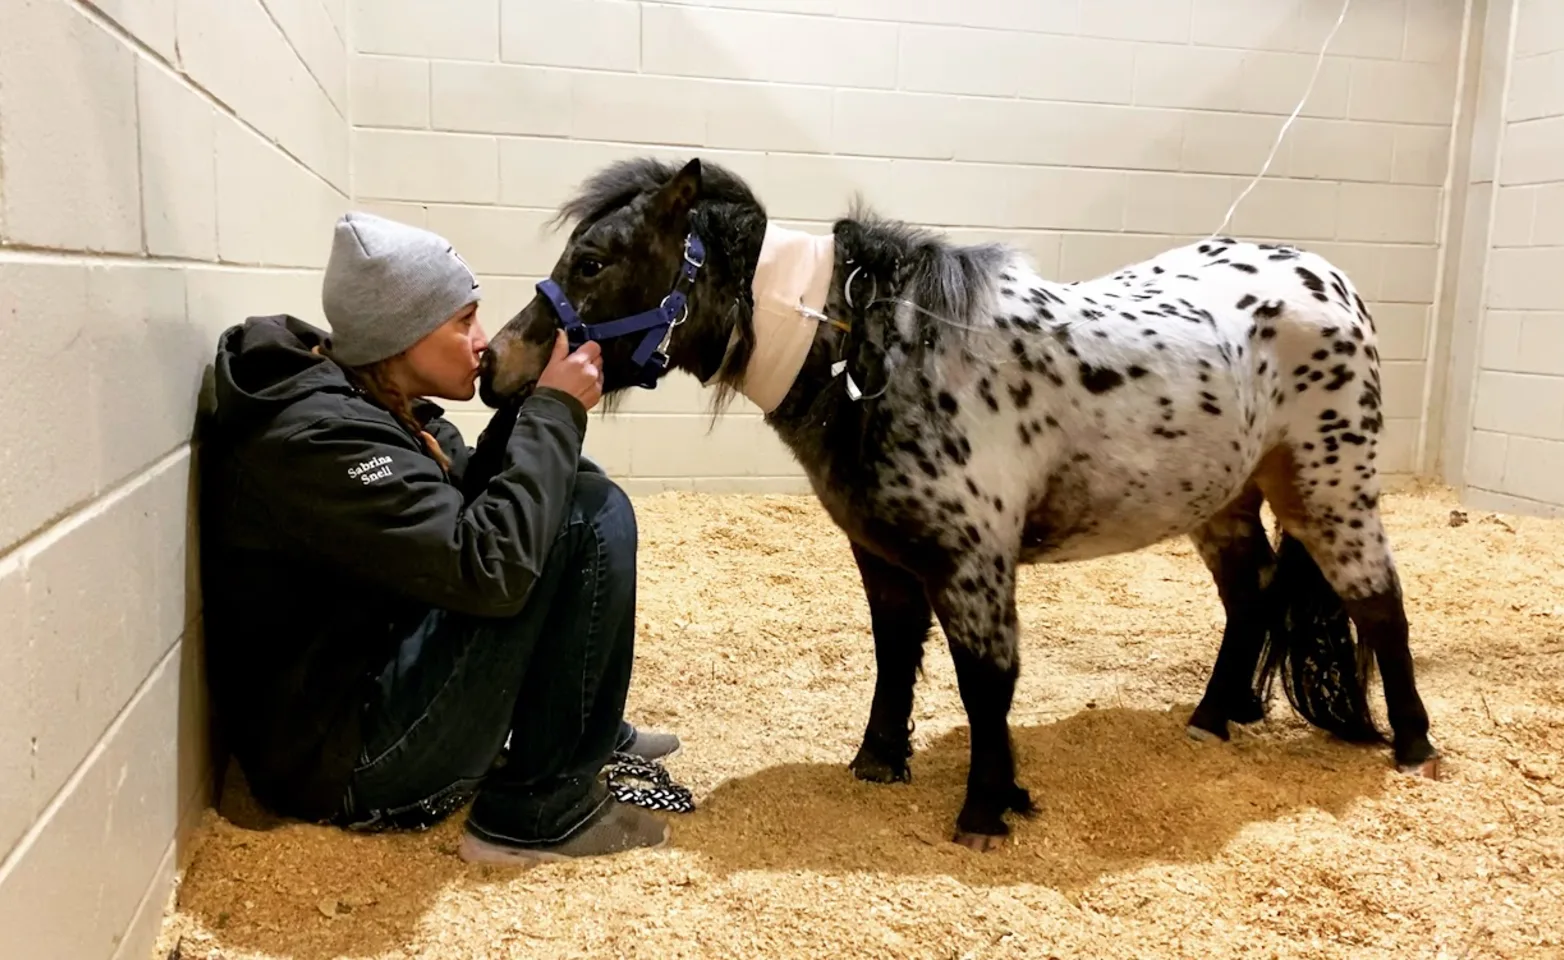 Staff kissing horse's nose